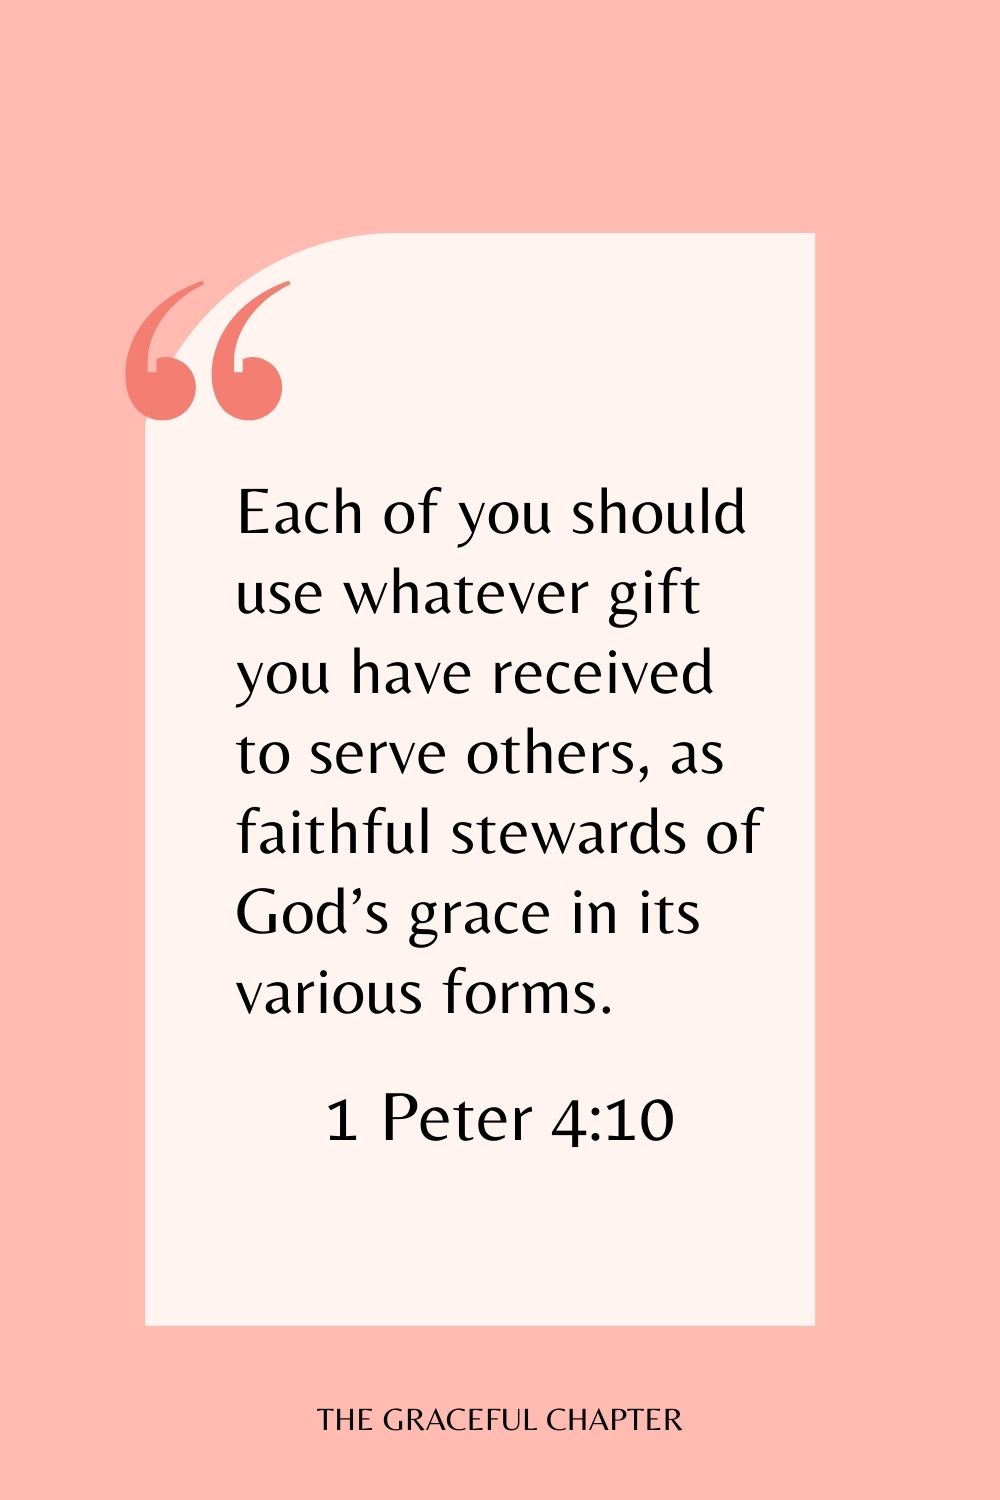 Each of you should use whatever gift you have received to serve others, as faithful stewards of God’s grace in its various forms. 1 Peter 4:10